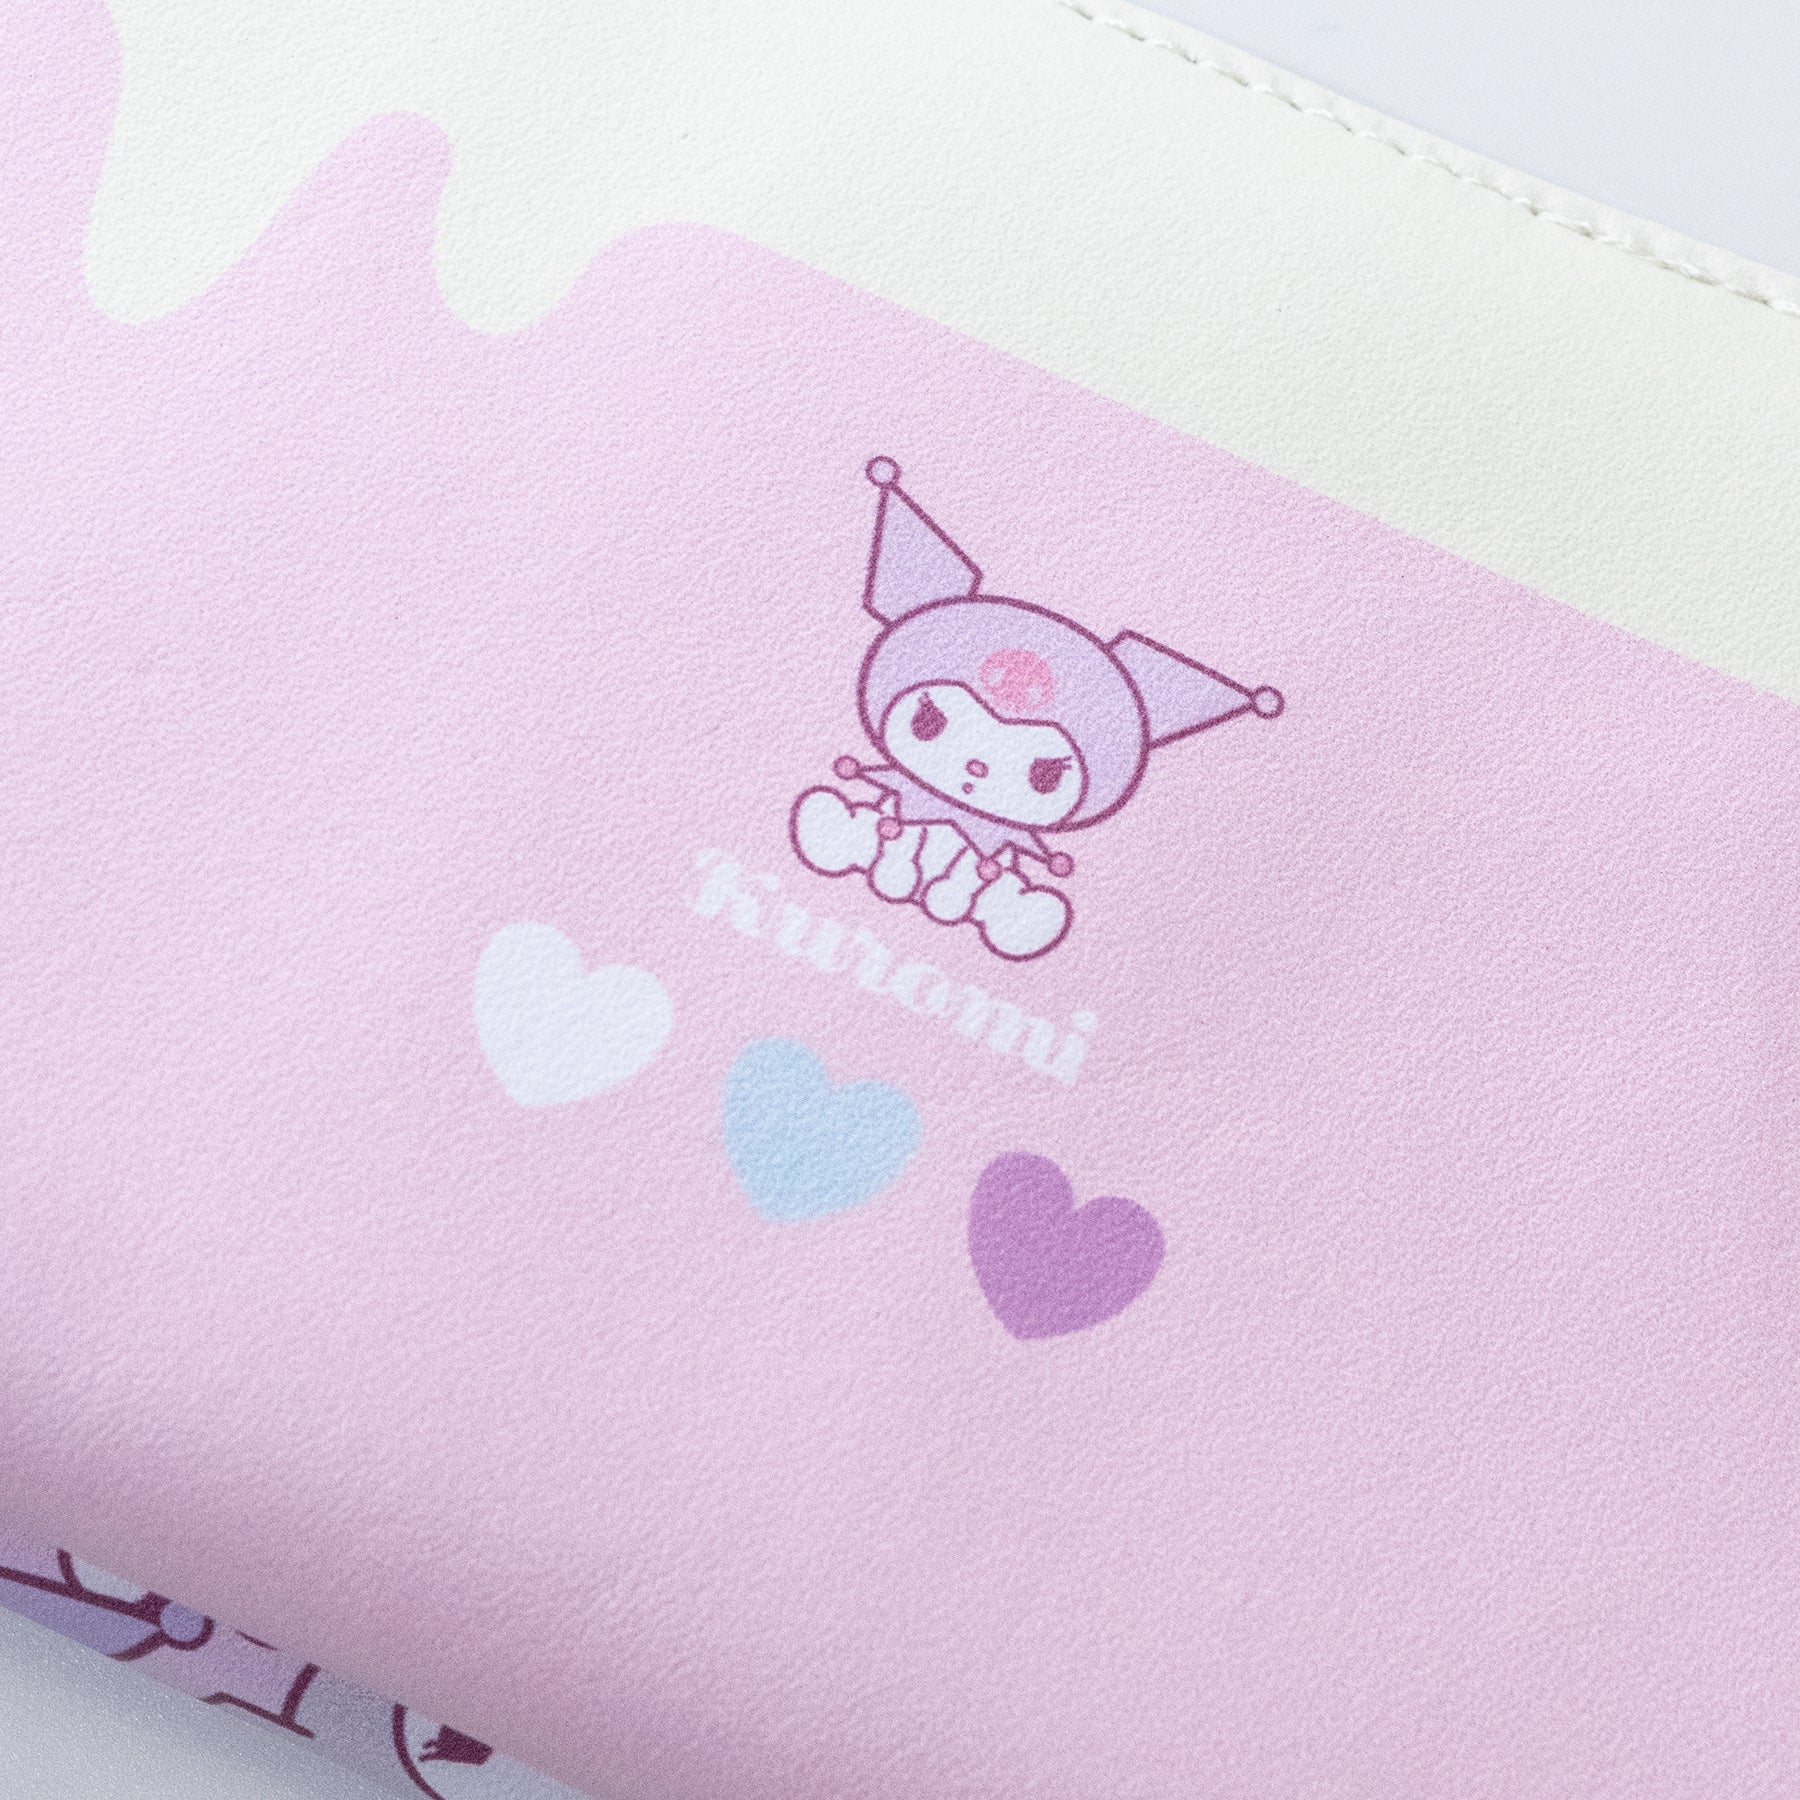 Sanrio Official Kuromi Pouch (2 type) - YOUAREMYPOISON